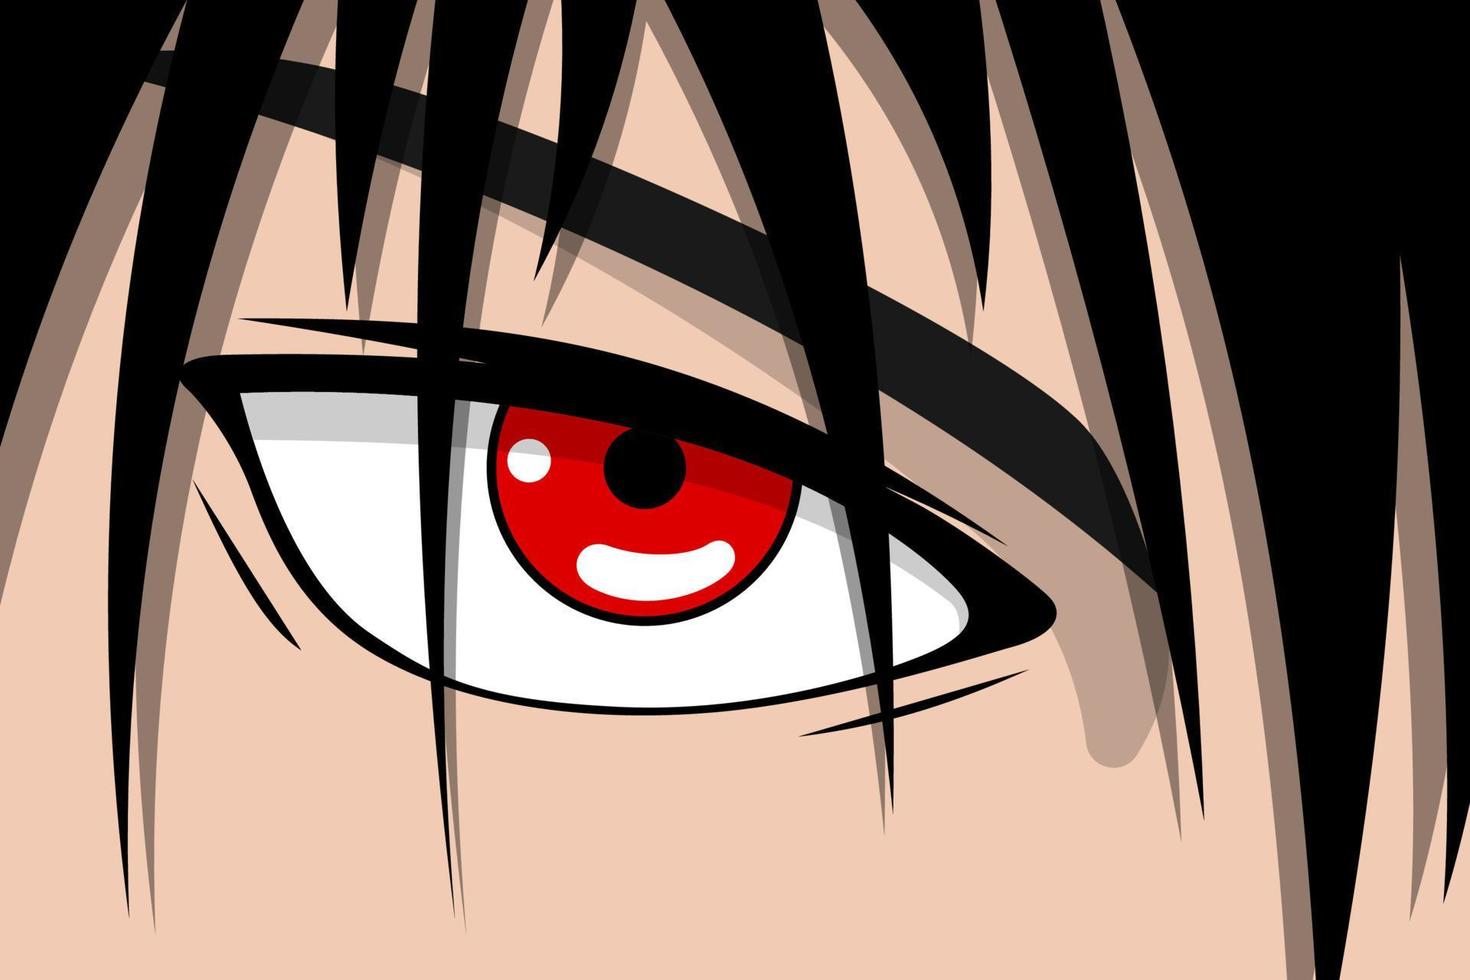 Anime pretty boy face with red eye and black hair. Manga hero art background concept. Vector cartoon look eps illustration